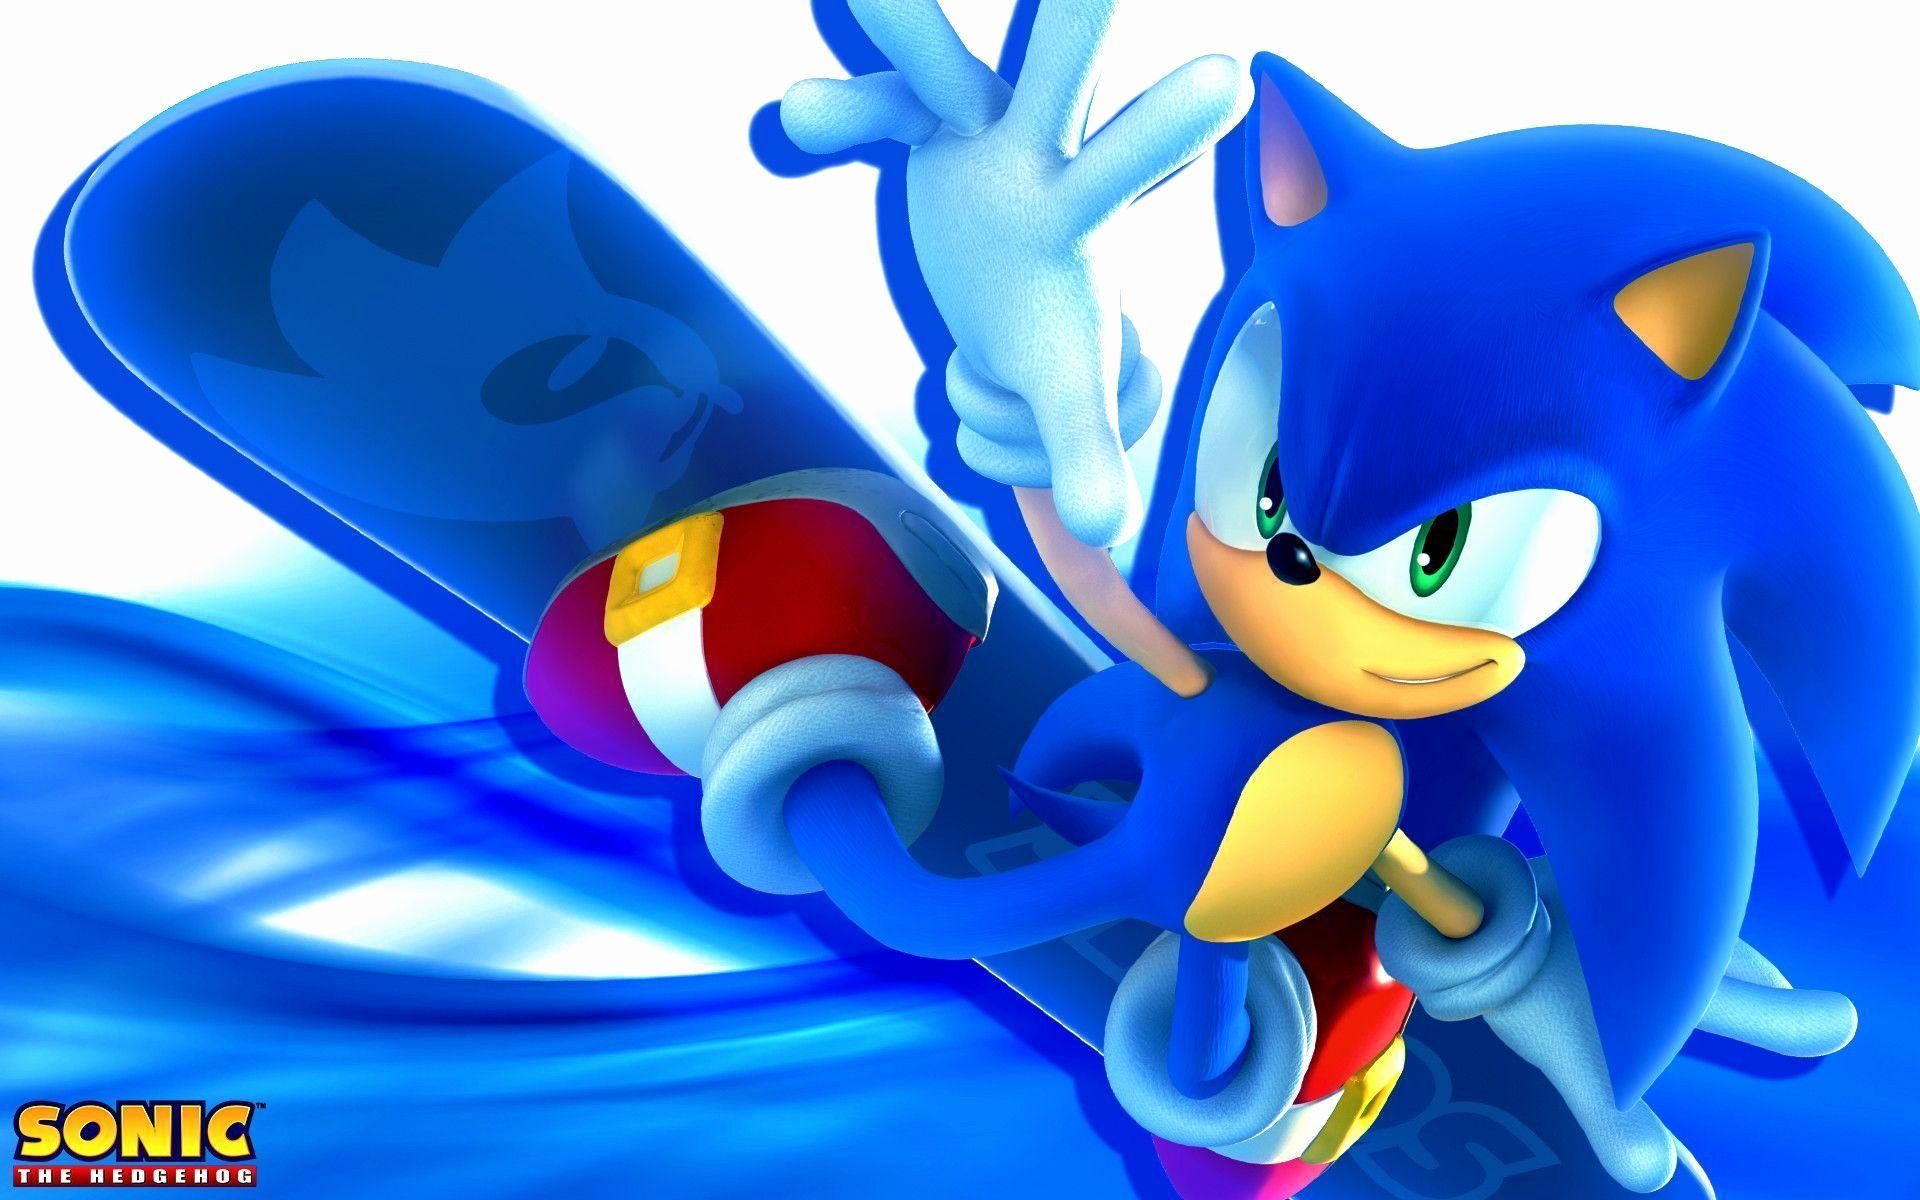 Sonic the hedgehog wallpapers hd